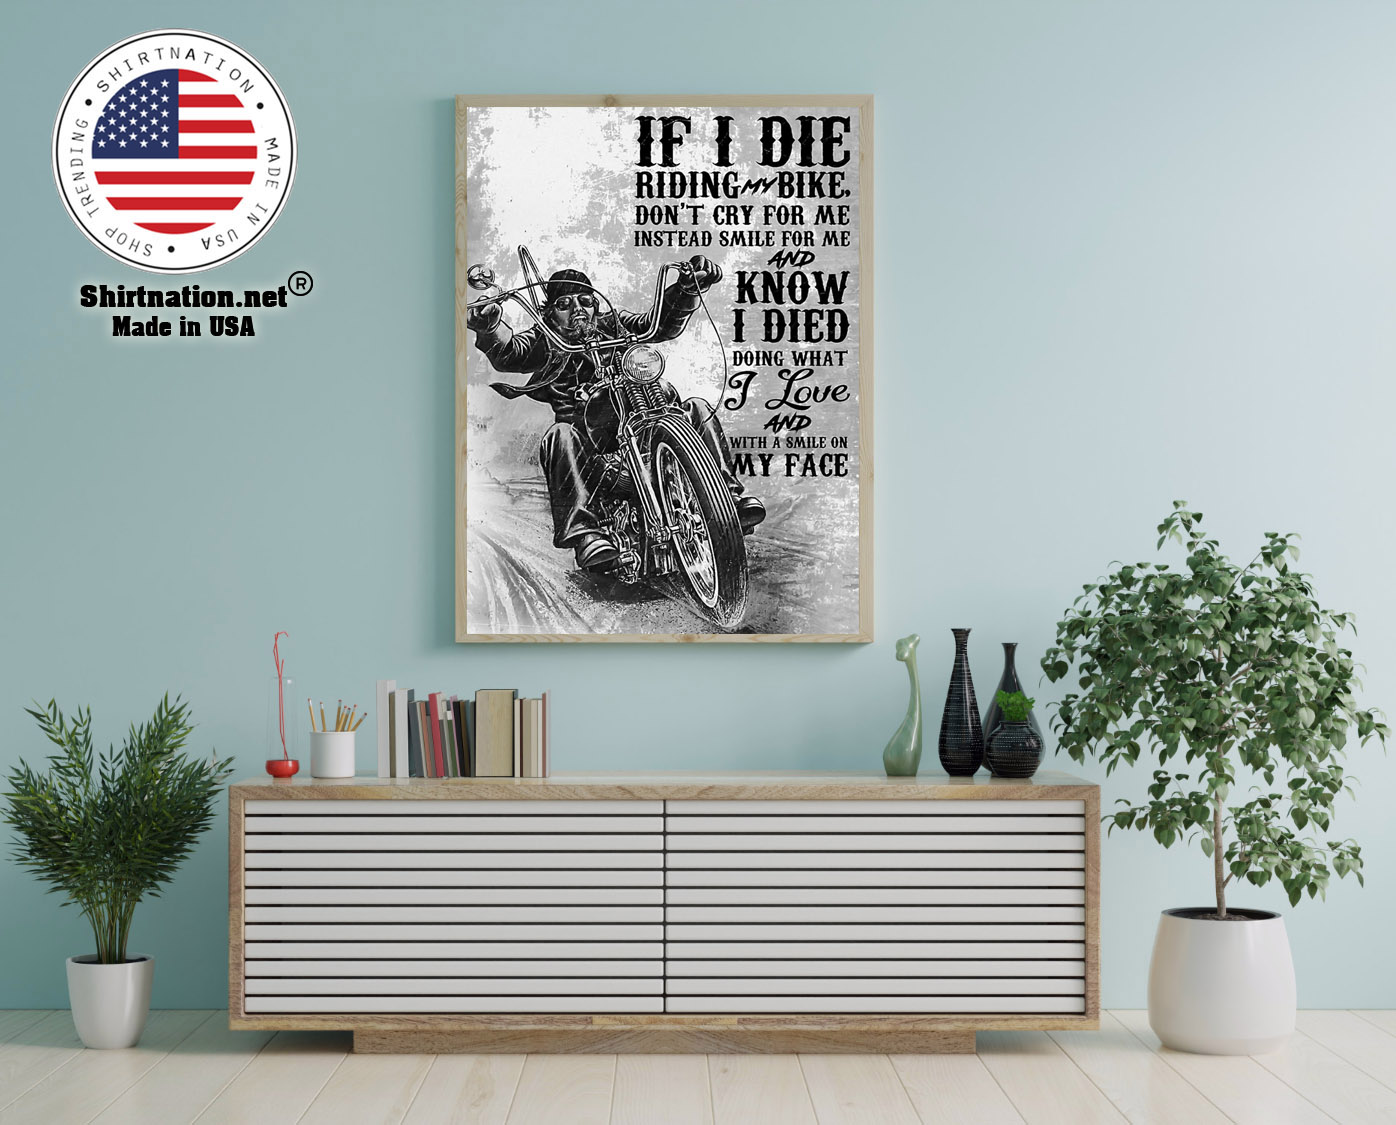 If i die riding bike don't cry for me poster